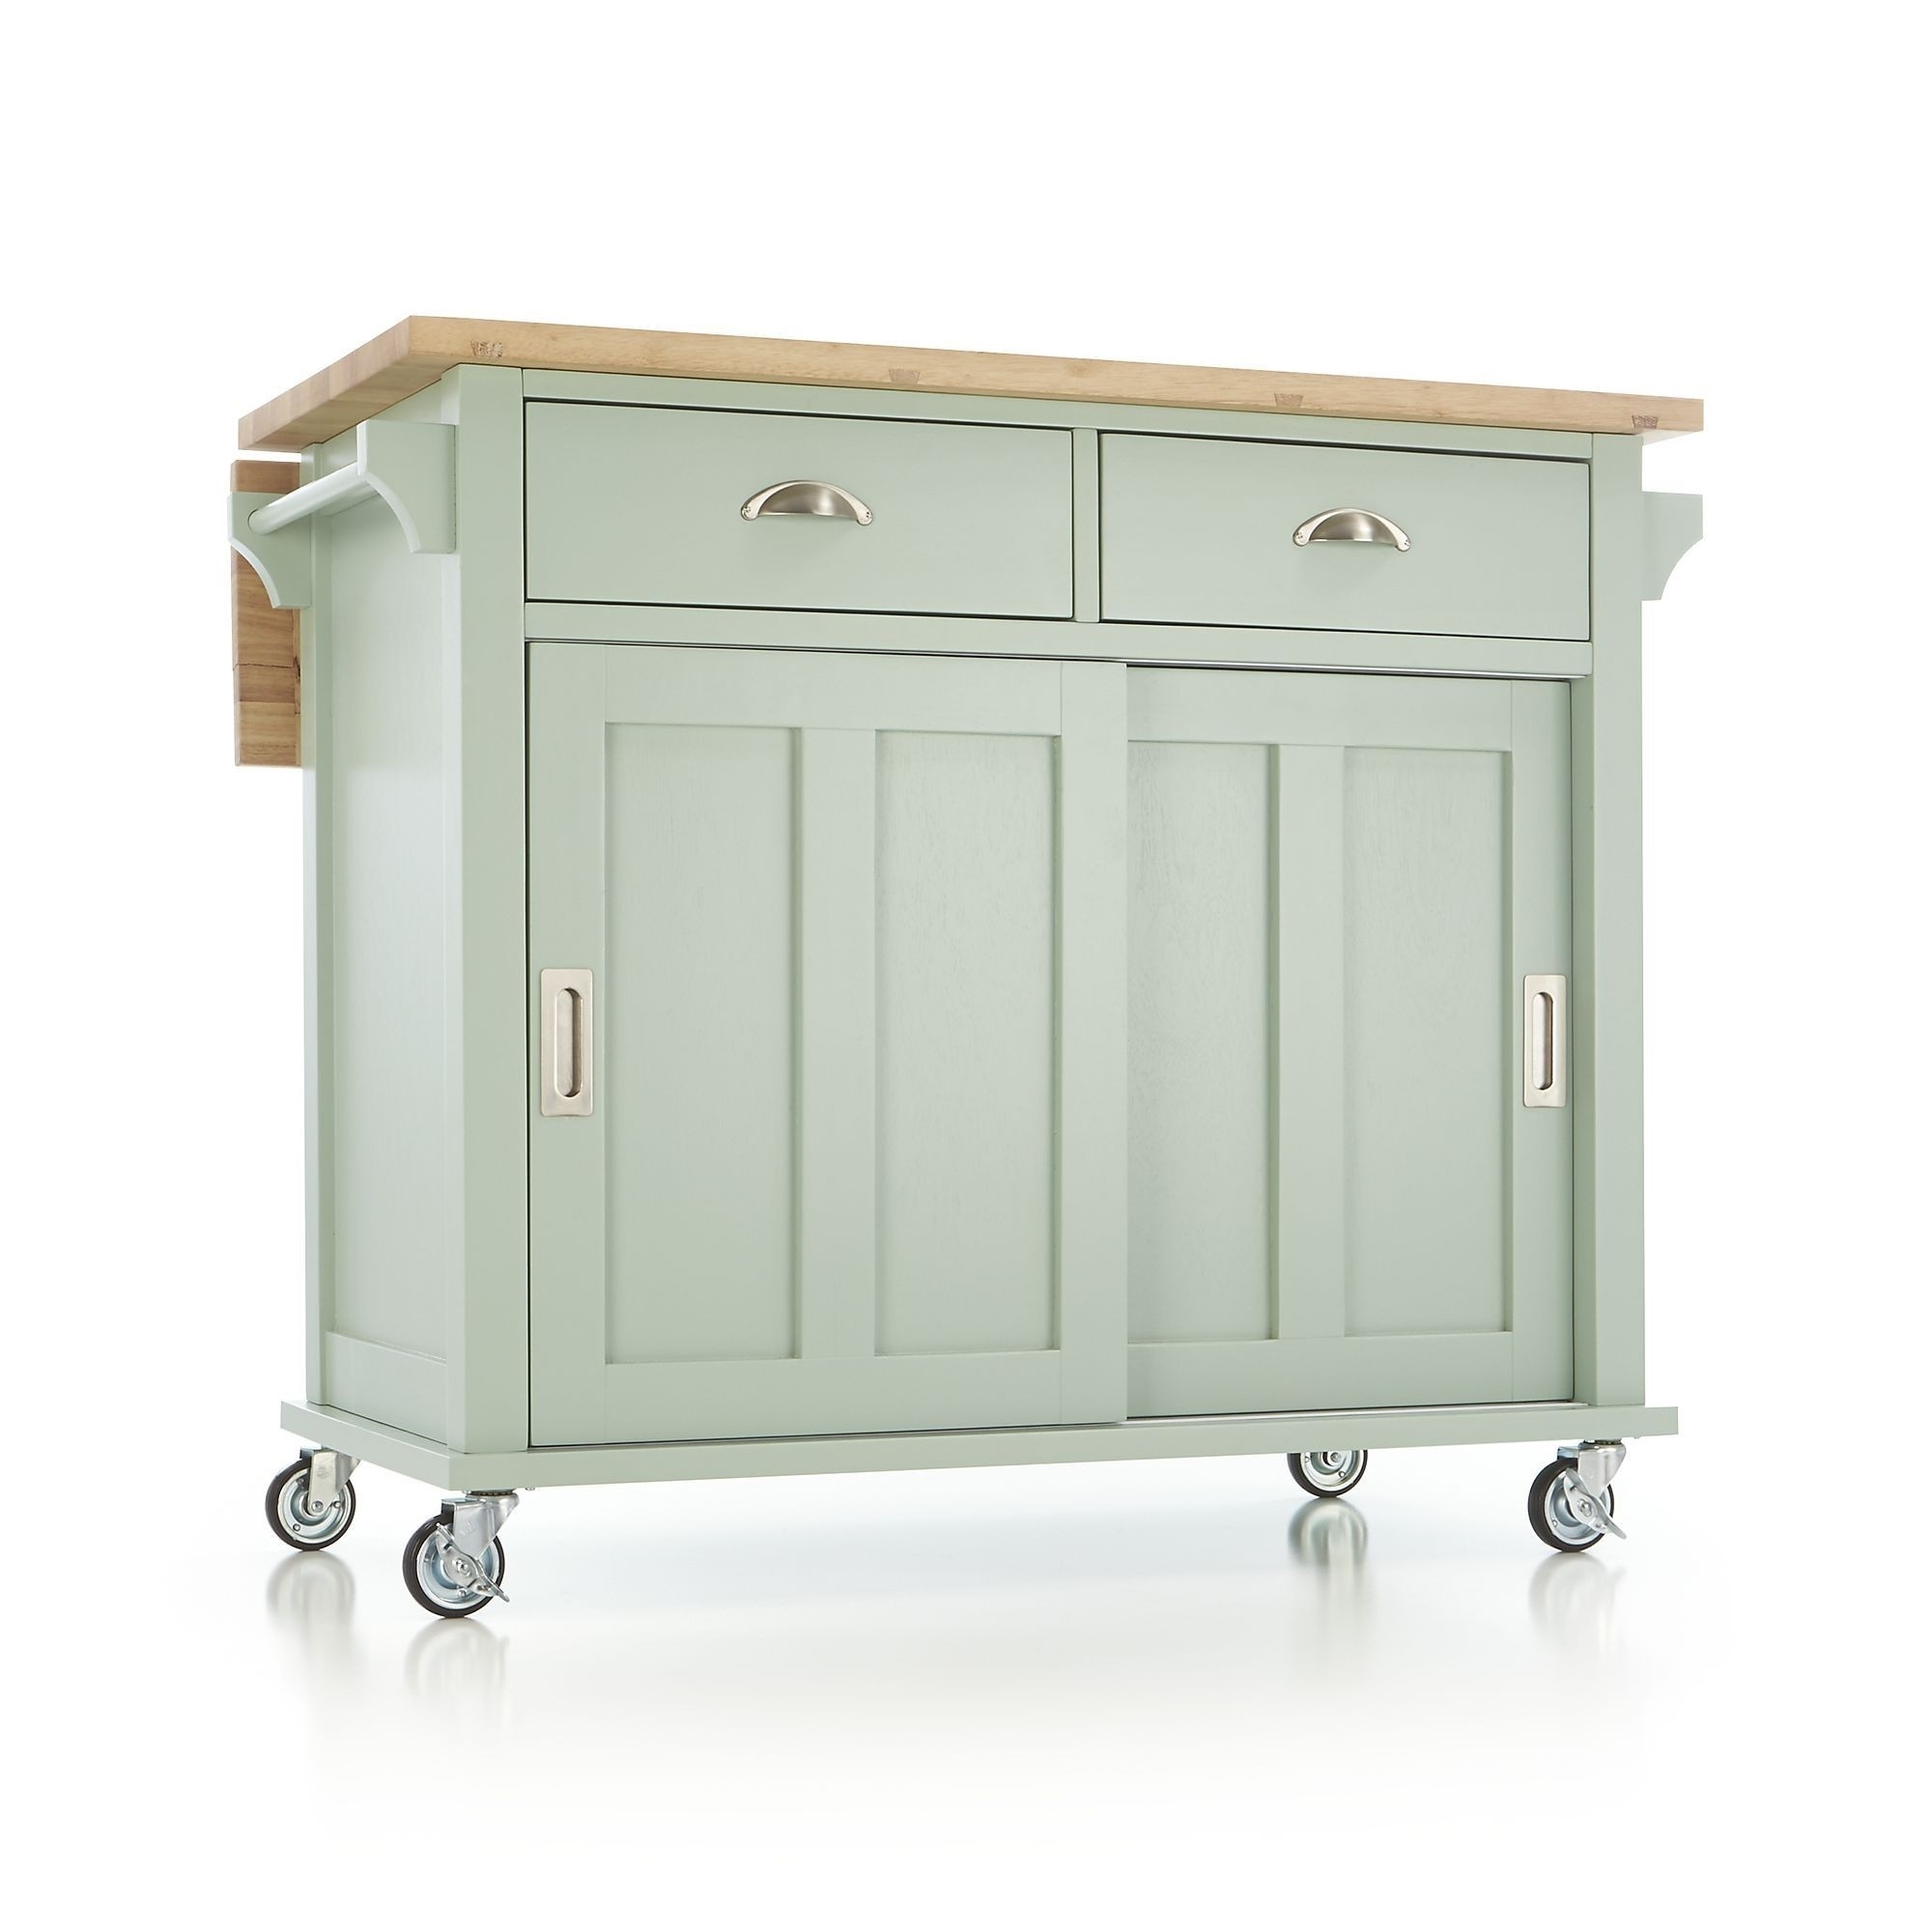 Cabinets on Wheels - Foter